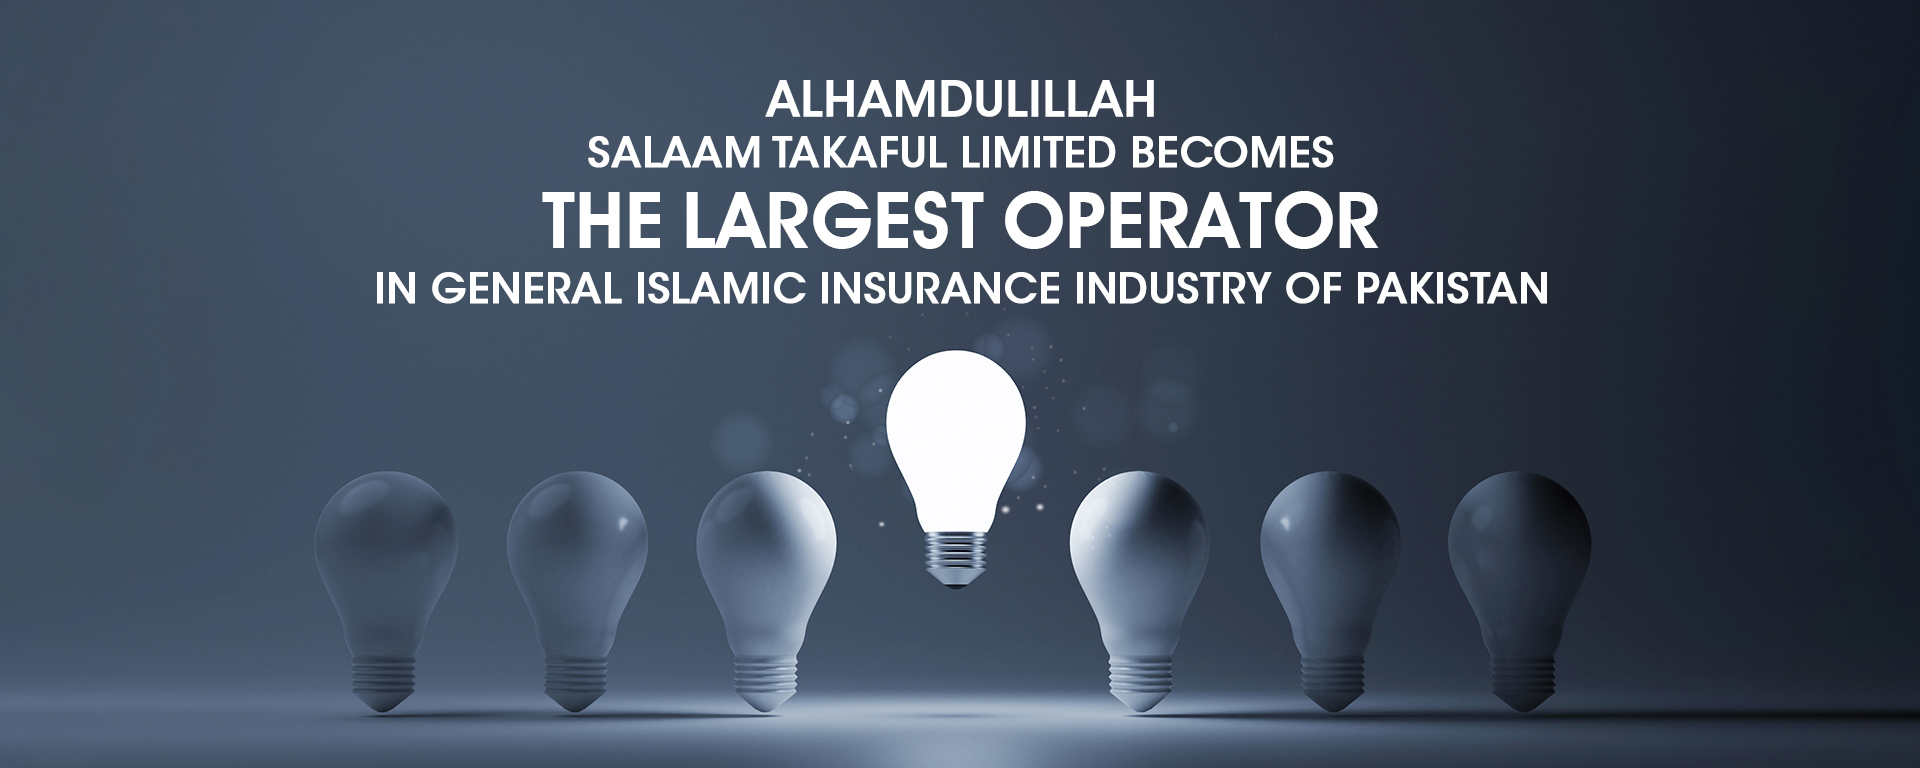 SALAAM TAKAFUL LIMITED BECOMES THE LARGEST OPERATOR IN GENERAL ISLAMIC INSURANCE INDUSTRY OF PAKISTAN